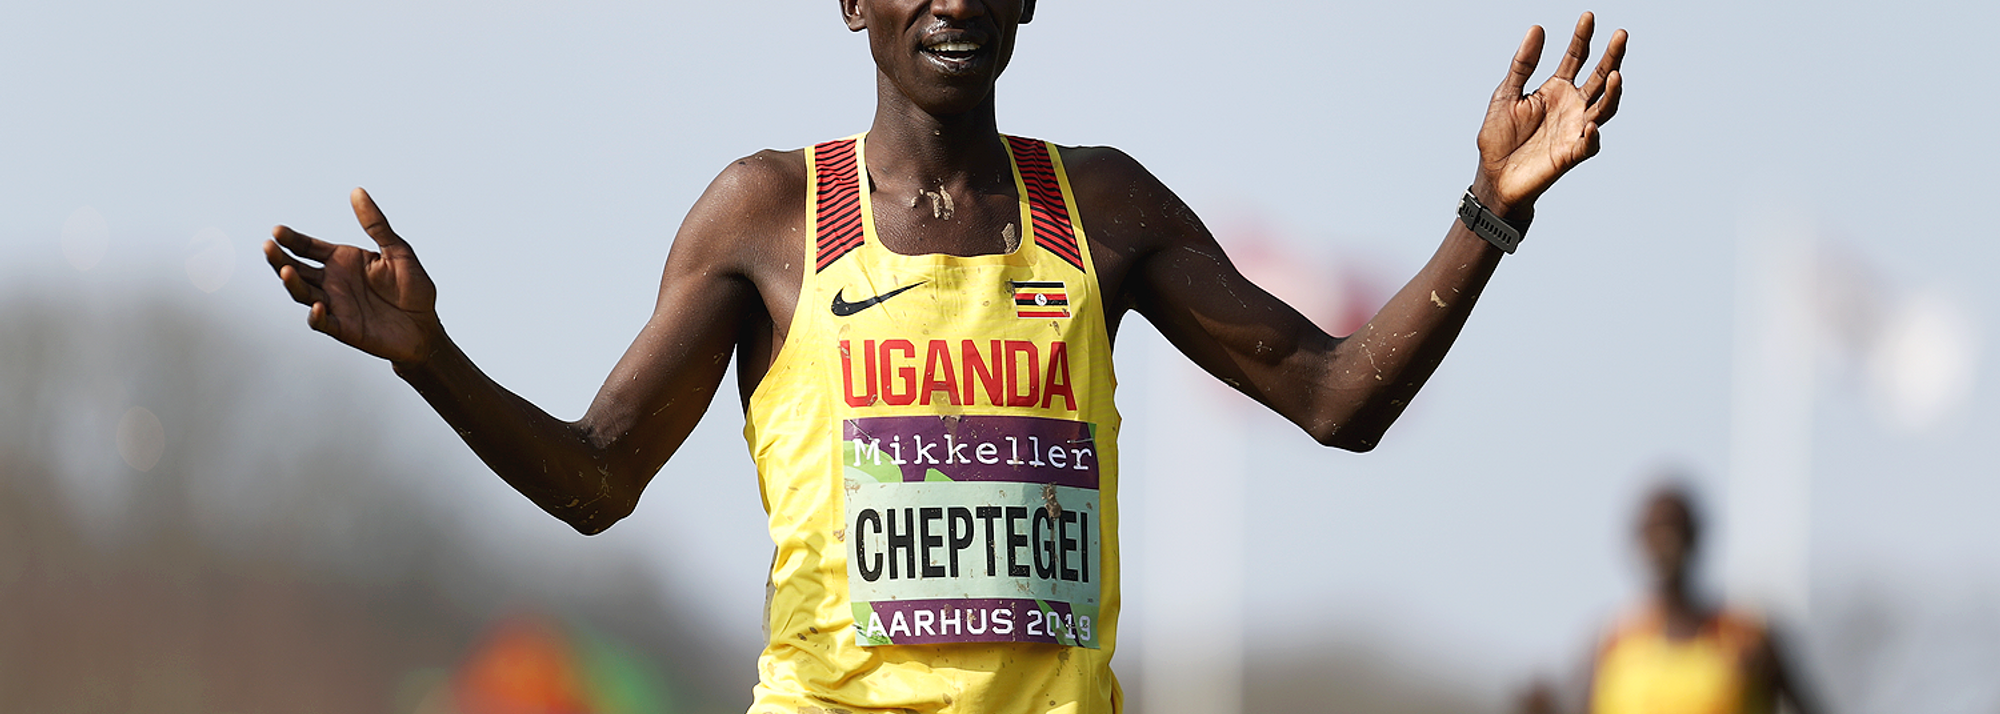 Winning the world cross-country title meant a lot to Joshua Cheptegei. It was redemption for his melt-down at home in Kampala two years ago. It was Uganda’s first senior win at the IAAF World Cross Country Championships. And he led his team to a gold medal which was another first.